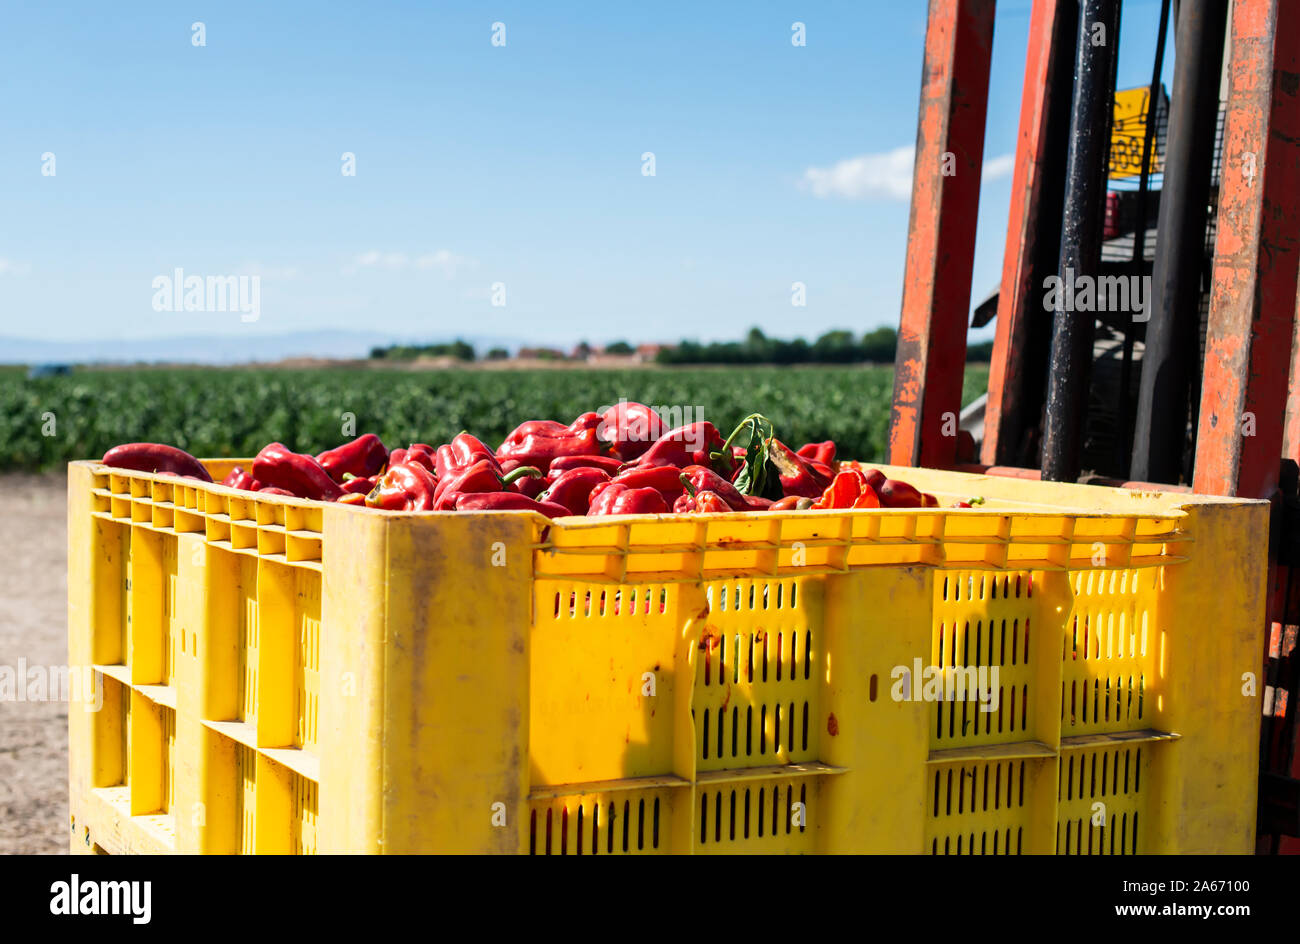 Mature big red peppers in crate ready for transport from the farm. Close-up peppers and agricultural land. Stock Photo